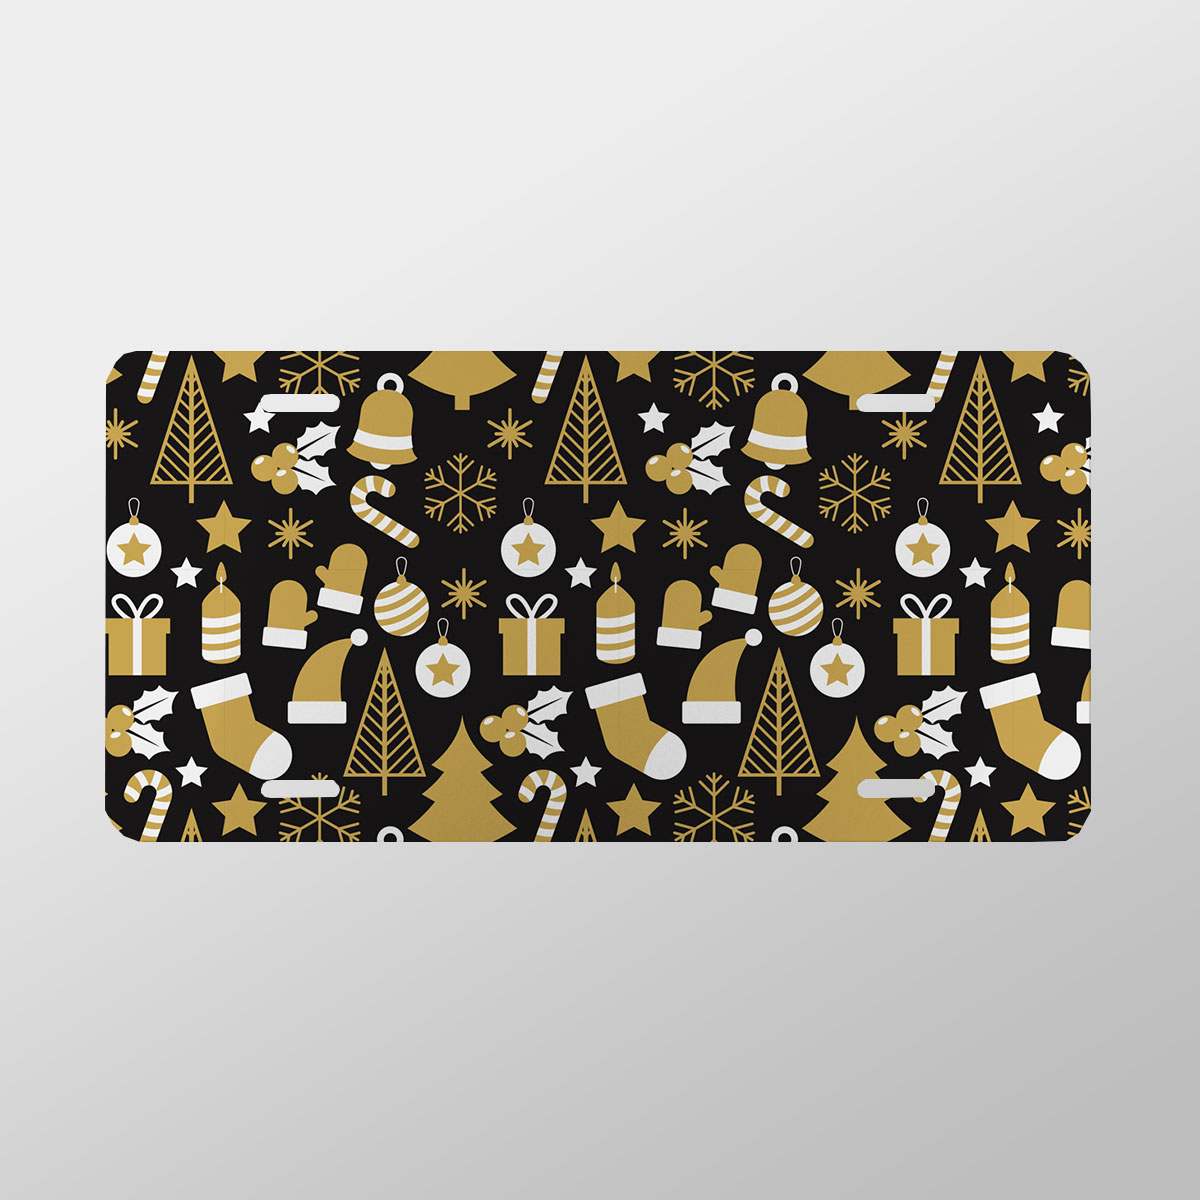 White And Gold Christmas Socks, Christmas Tree, Candy Cane On Black Background Vanity Plate